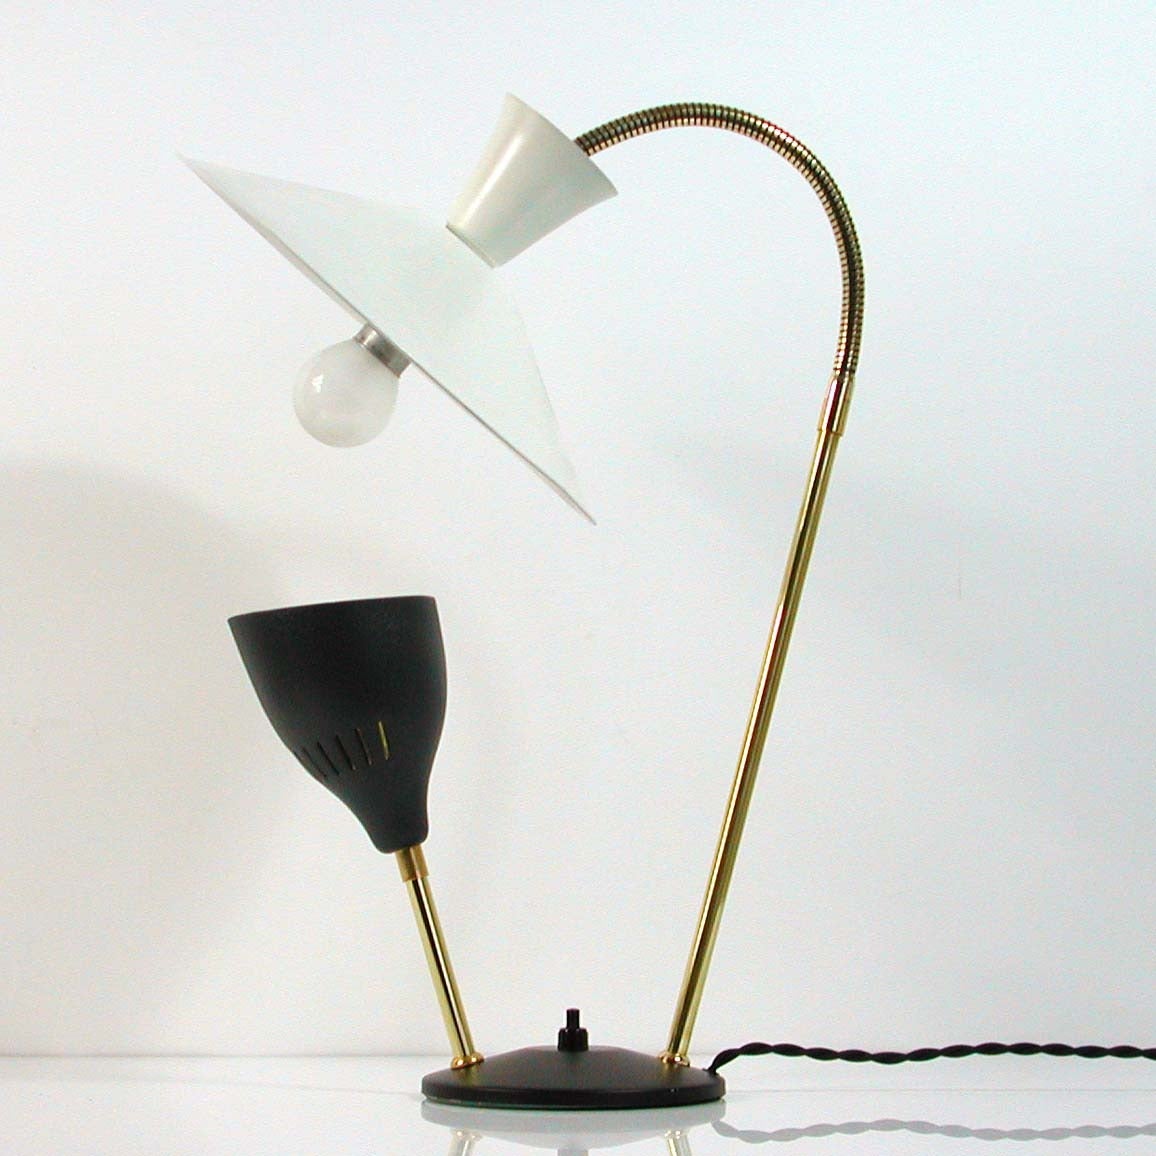 Awesome 1950s double arm brass and metal table lamp by André Lavigne for ALUMINOR Nice France.
The lamp has got one white lacquered lamp shade with goose neck lamp arm and one dark grey lacquered shade on black lacquered base.
Each shade requires